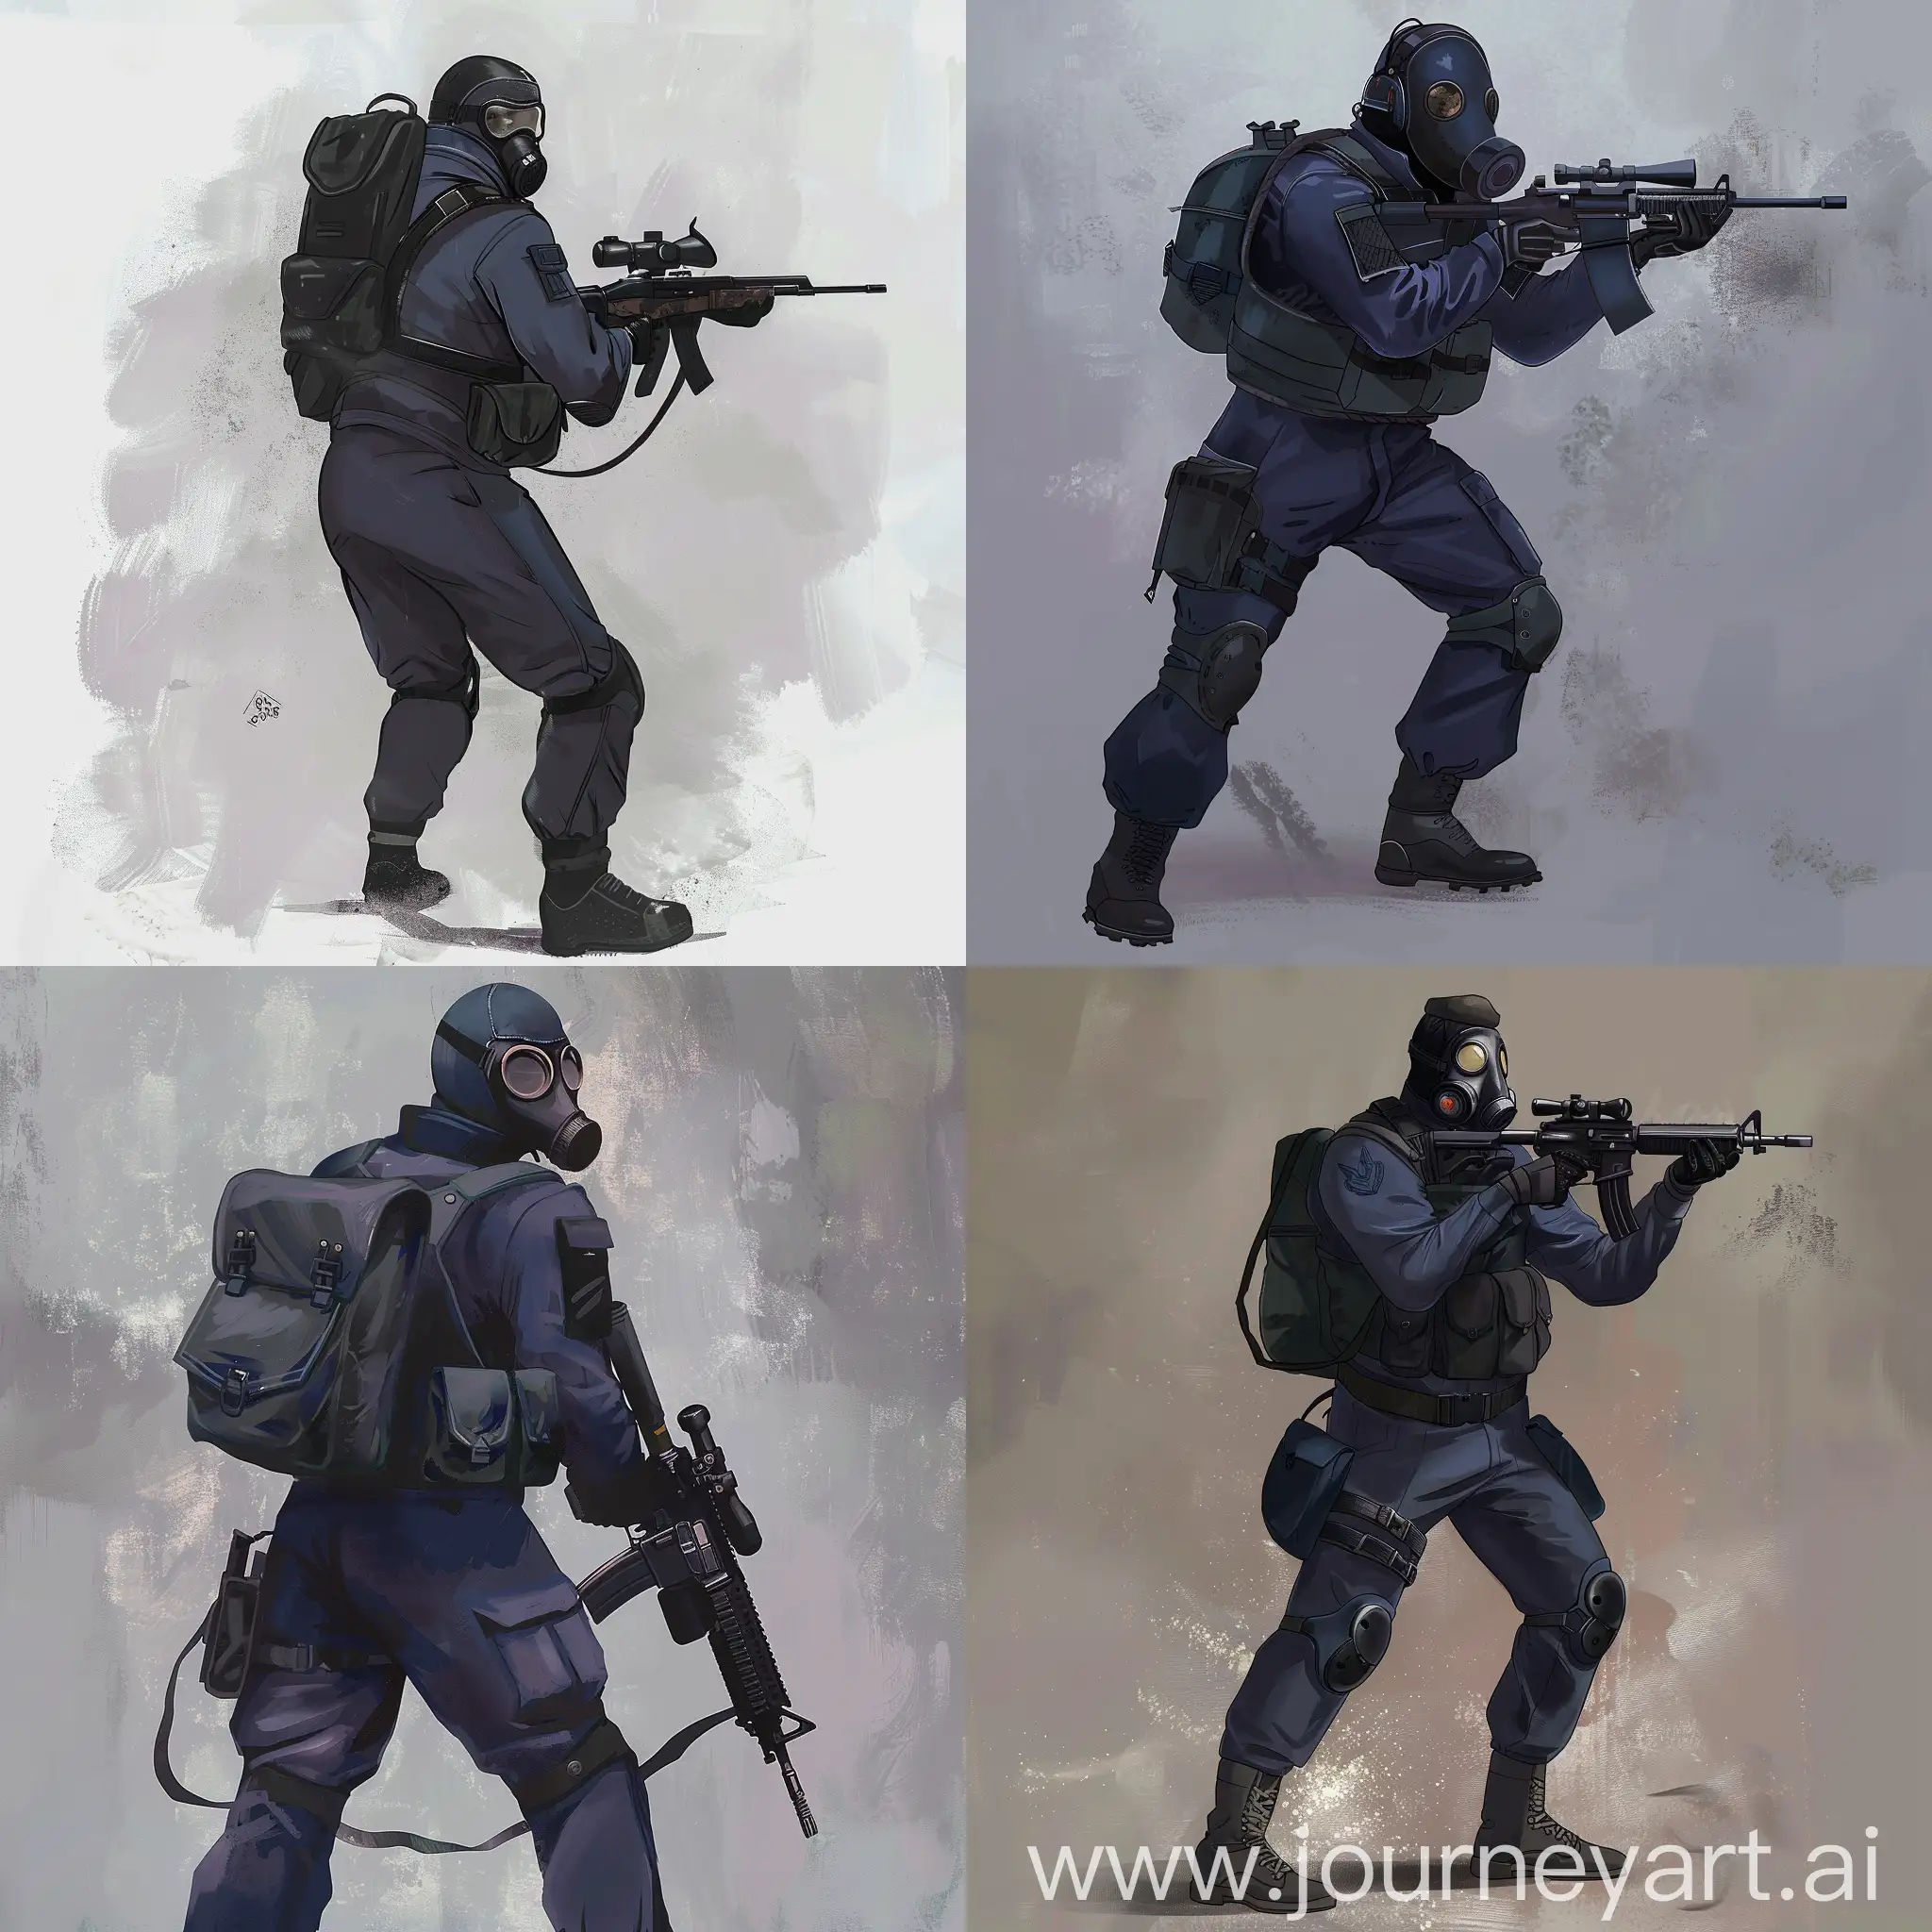 Concept character art, dark purple military suit, gasmask on his face, small military backpack, military unloading on his body, sniper rifle in his hands.